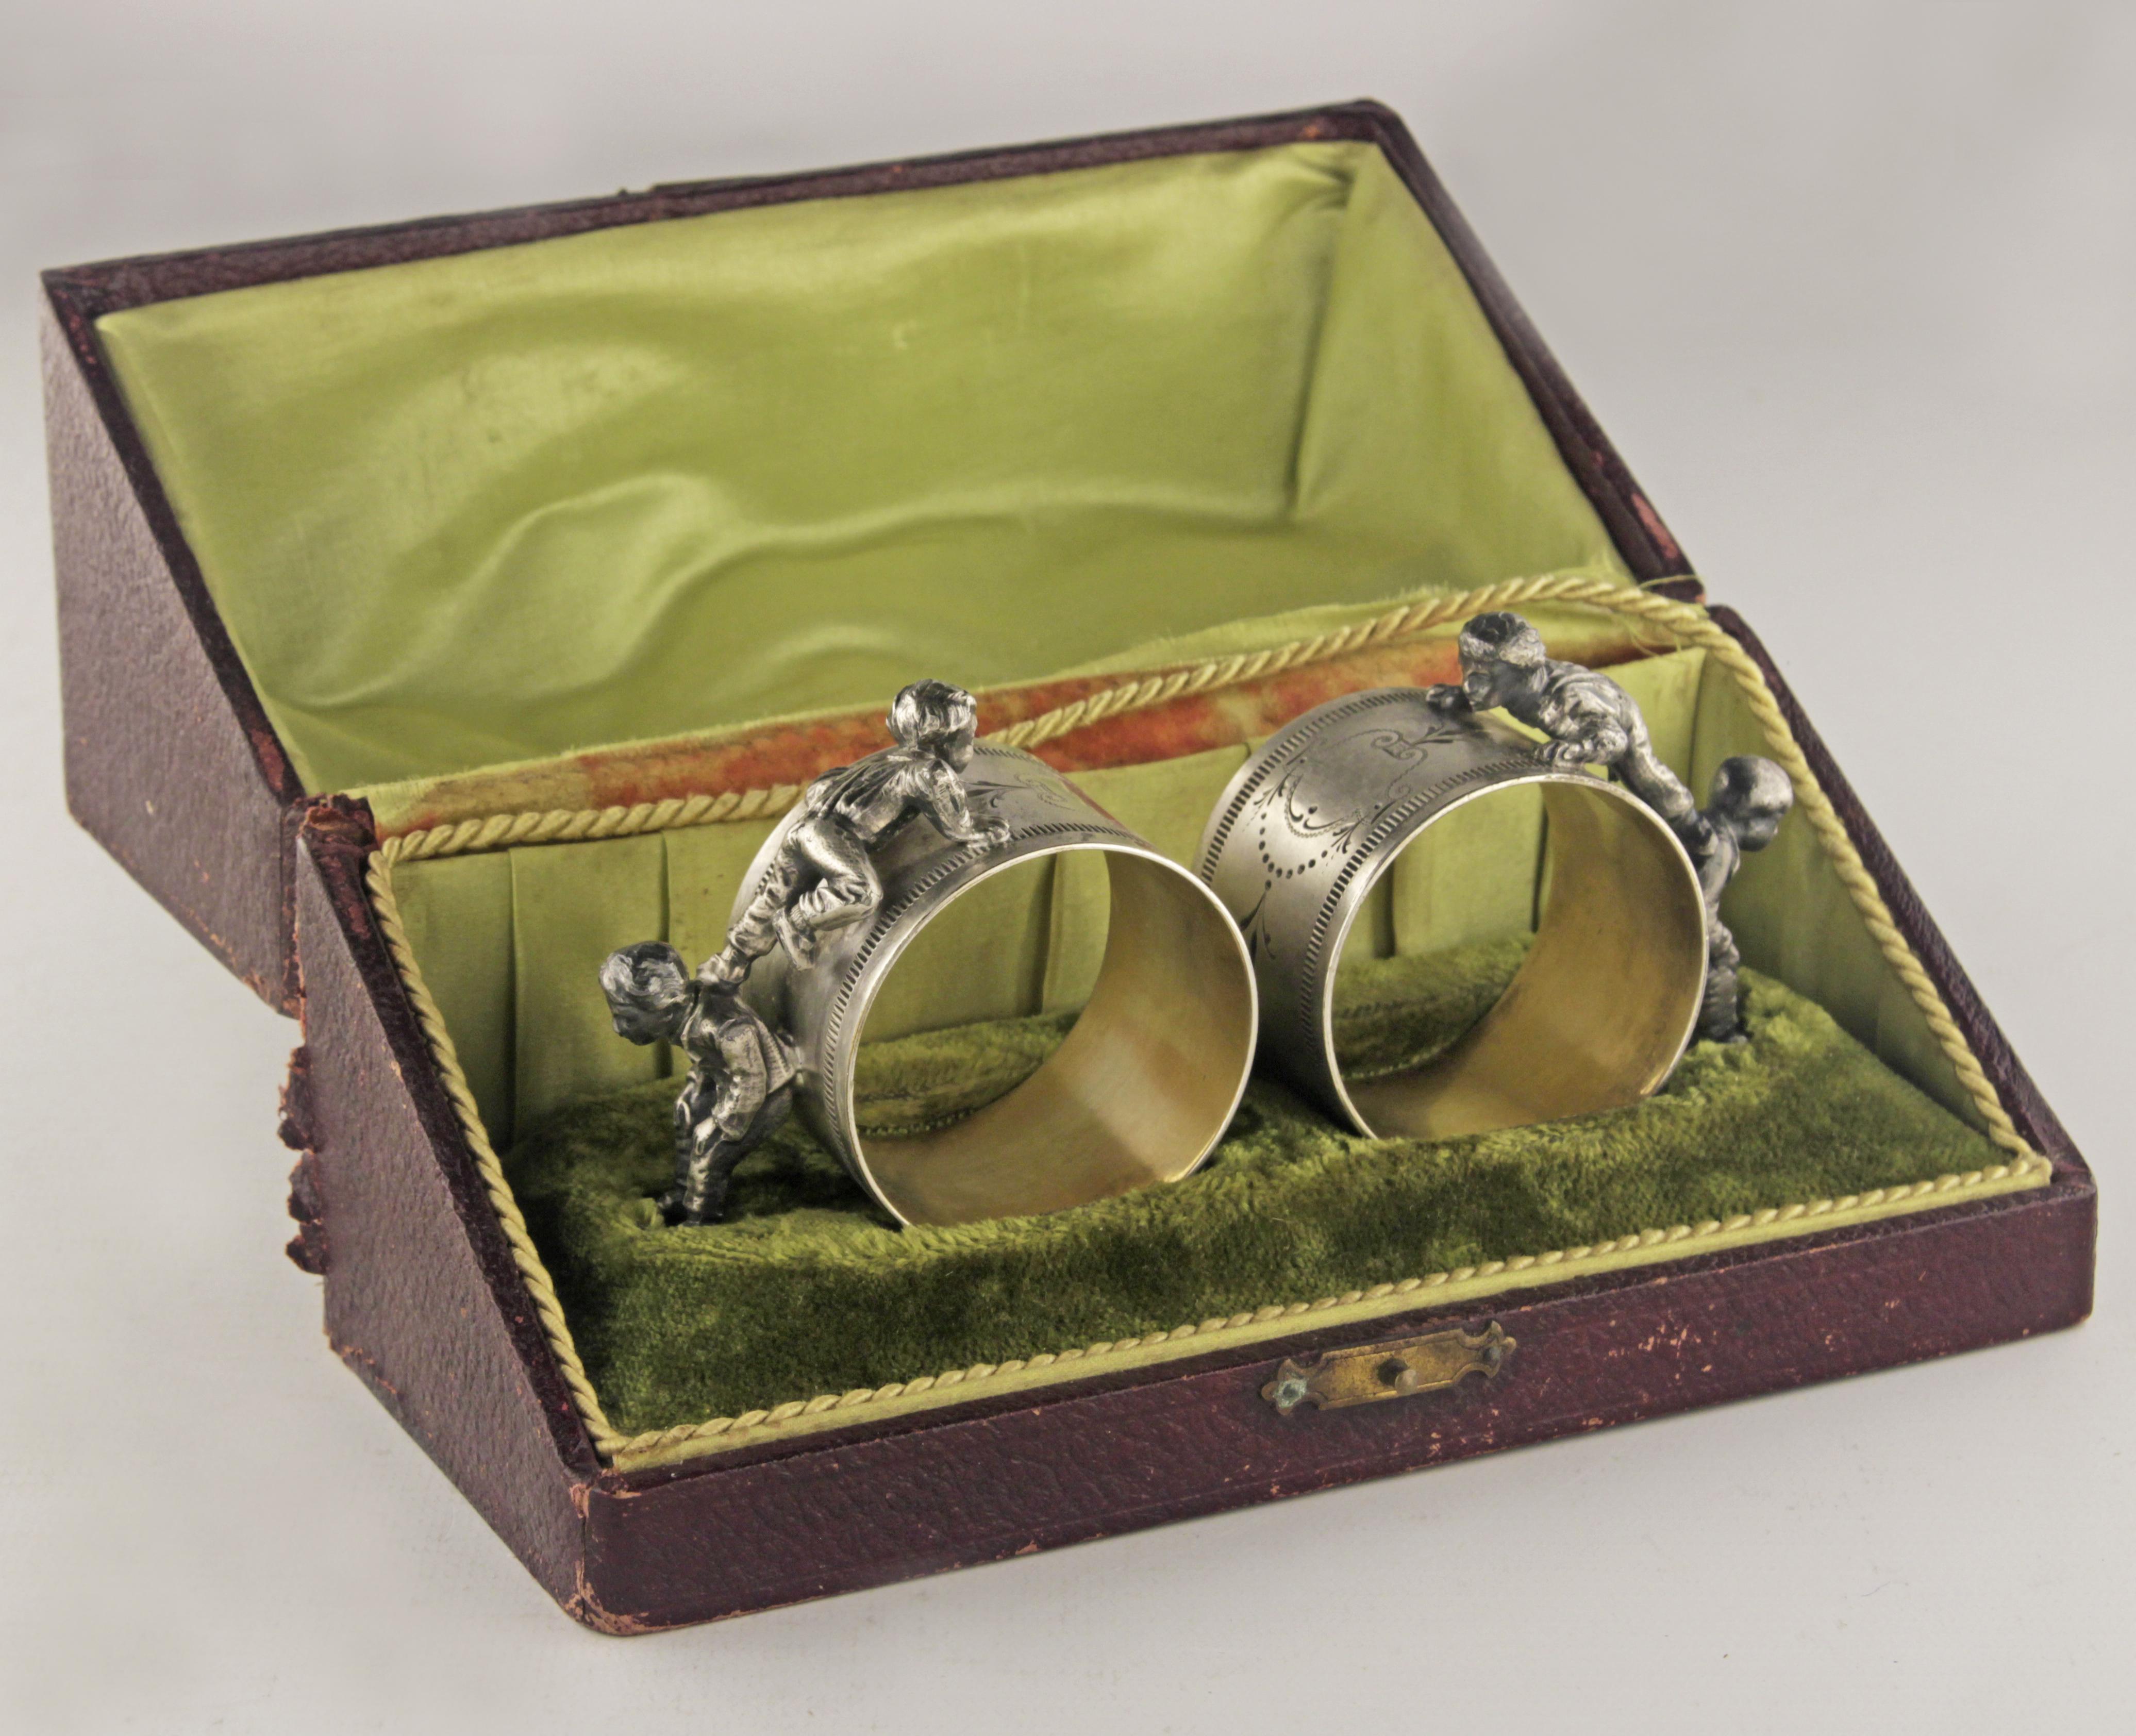 Pair of early 20th century Jugendstil/Art Nouveau silver napkin rings and decorative box by german manufacturer Württembergische Metallwarenfabrik (WMF)

By: Württembergische Metallwarenfabrik (WMF)
Material: silver, wood, thread, velvet, cord,